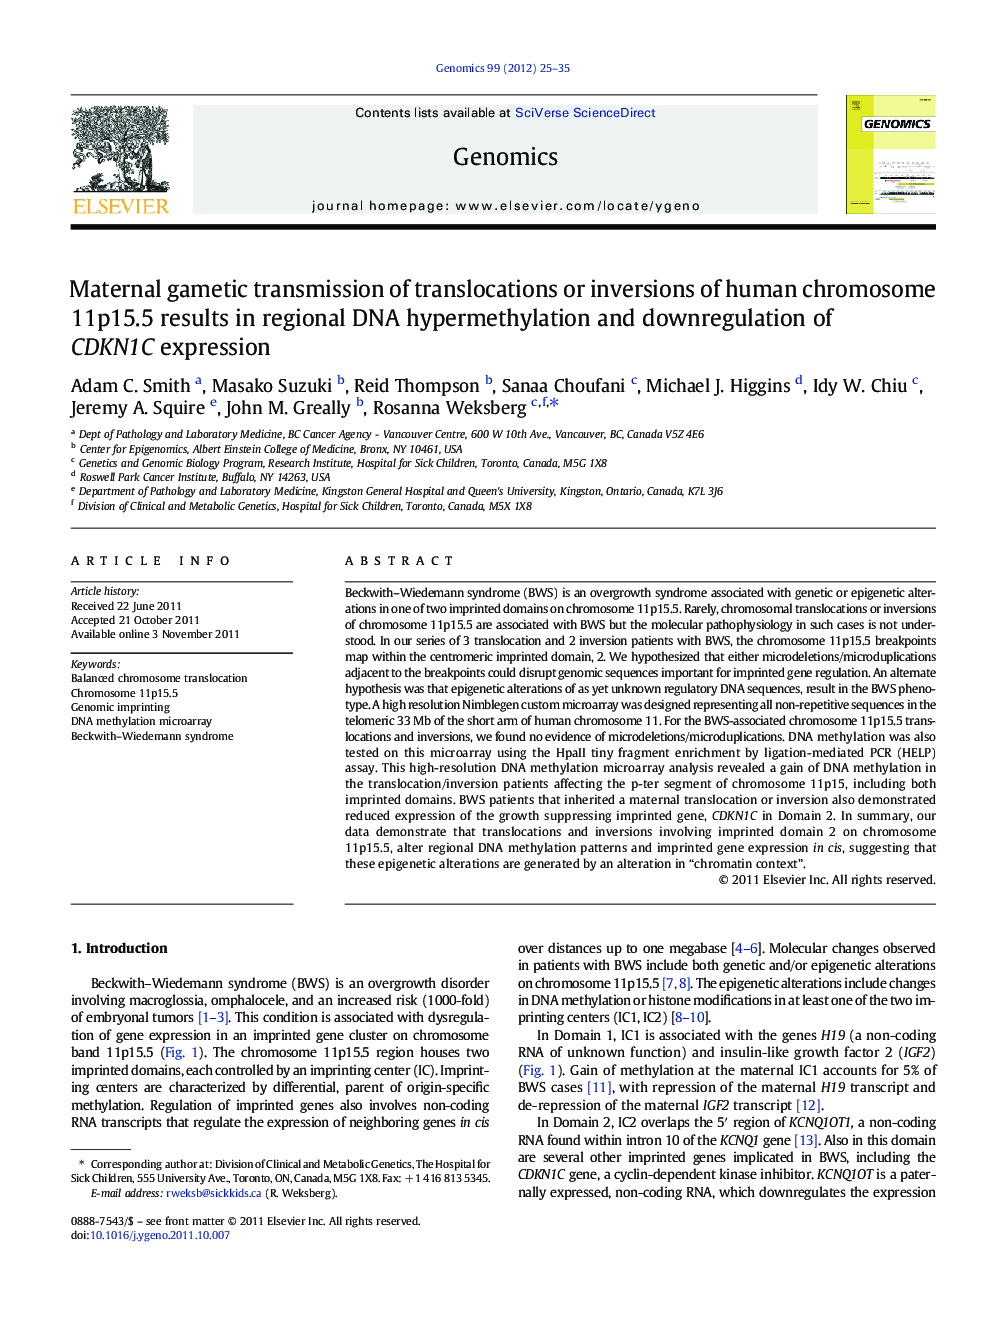 Maternal gametic transmission of translocations or inversions of human chromosome 11p15.5 results in regional DNA hypermethylation and downregulation of CDKN1C expression